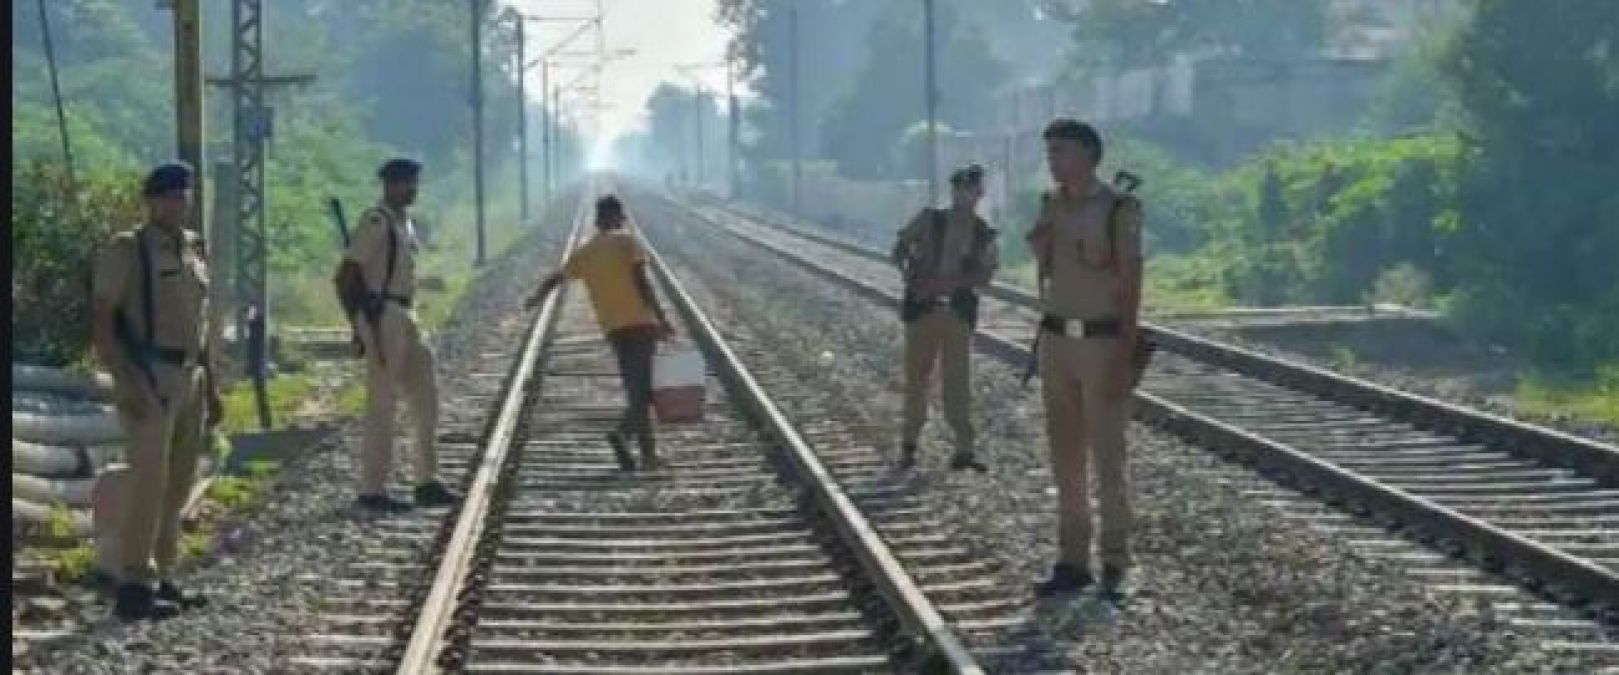 Jharkhand: Naxalites pasted threatening posters after blowing up railway tracks, many trains route diverted